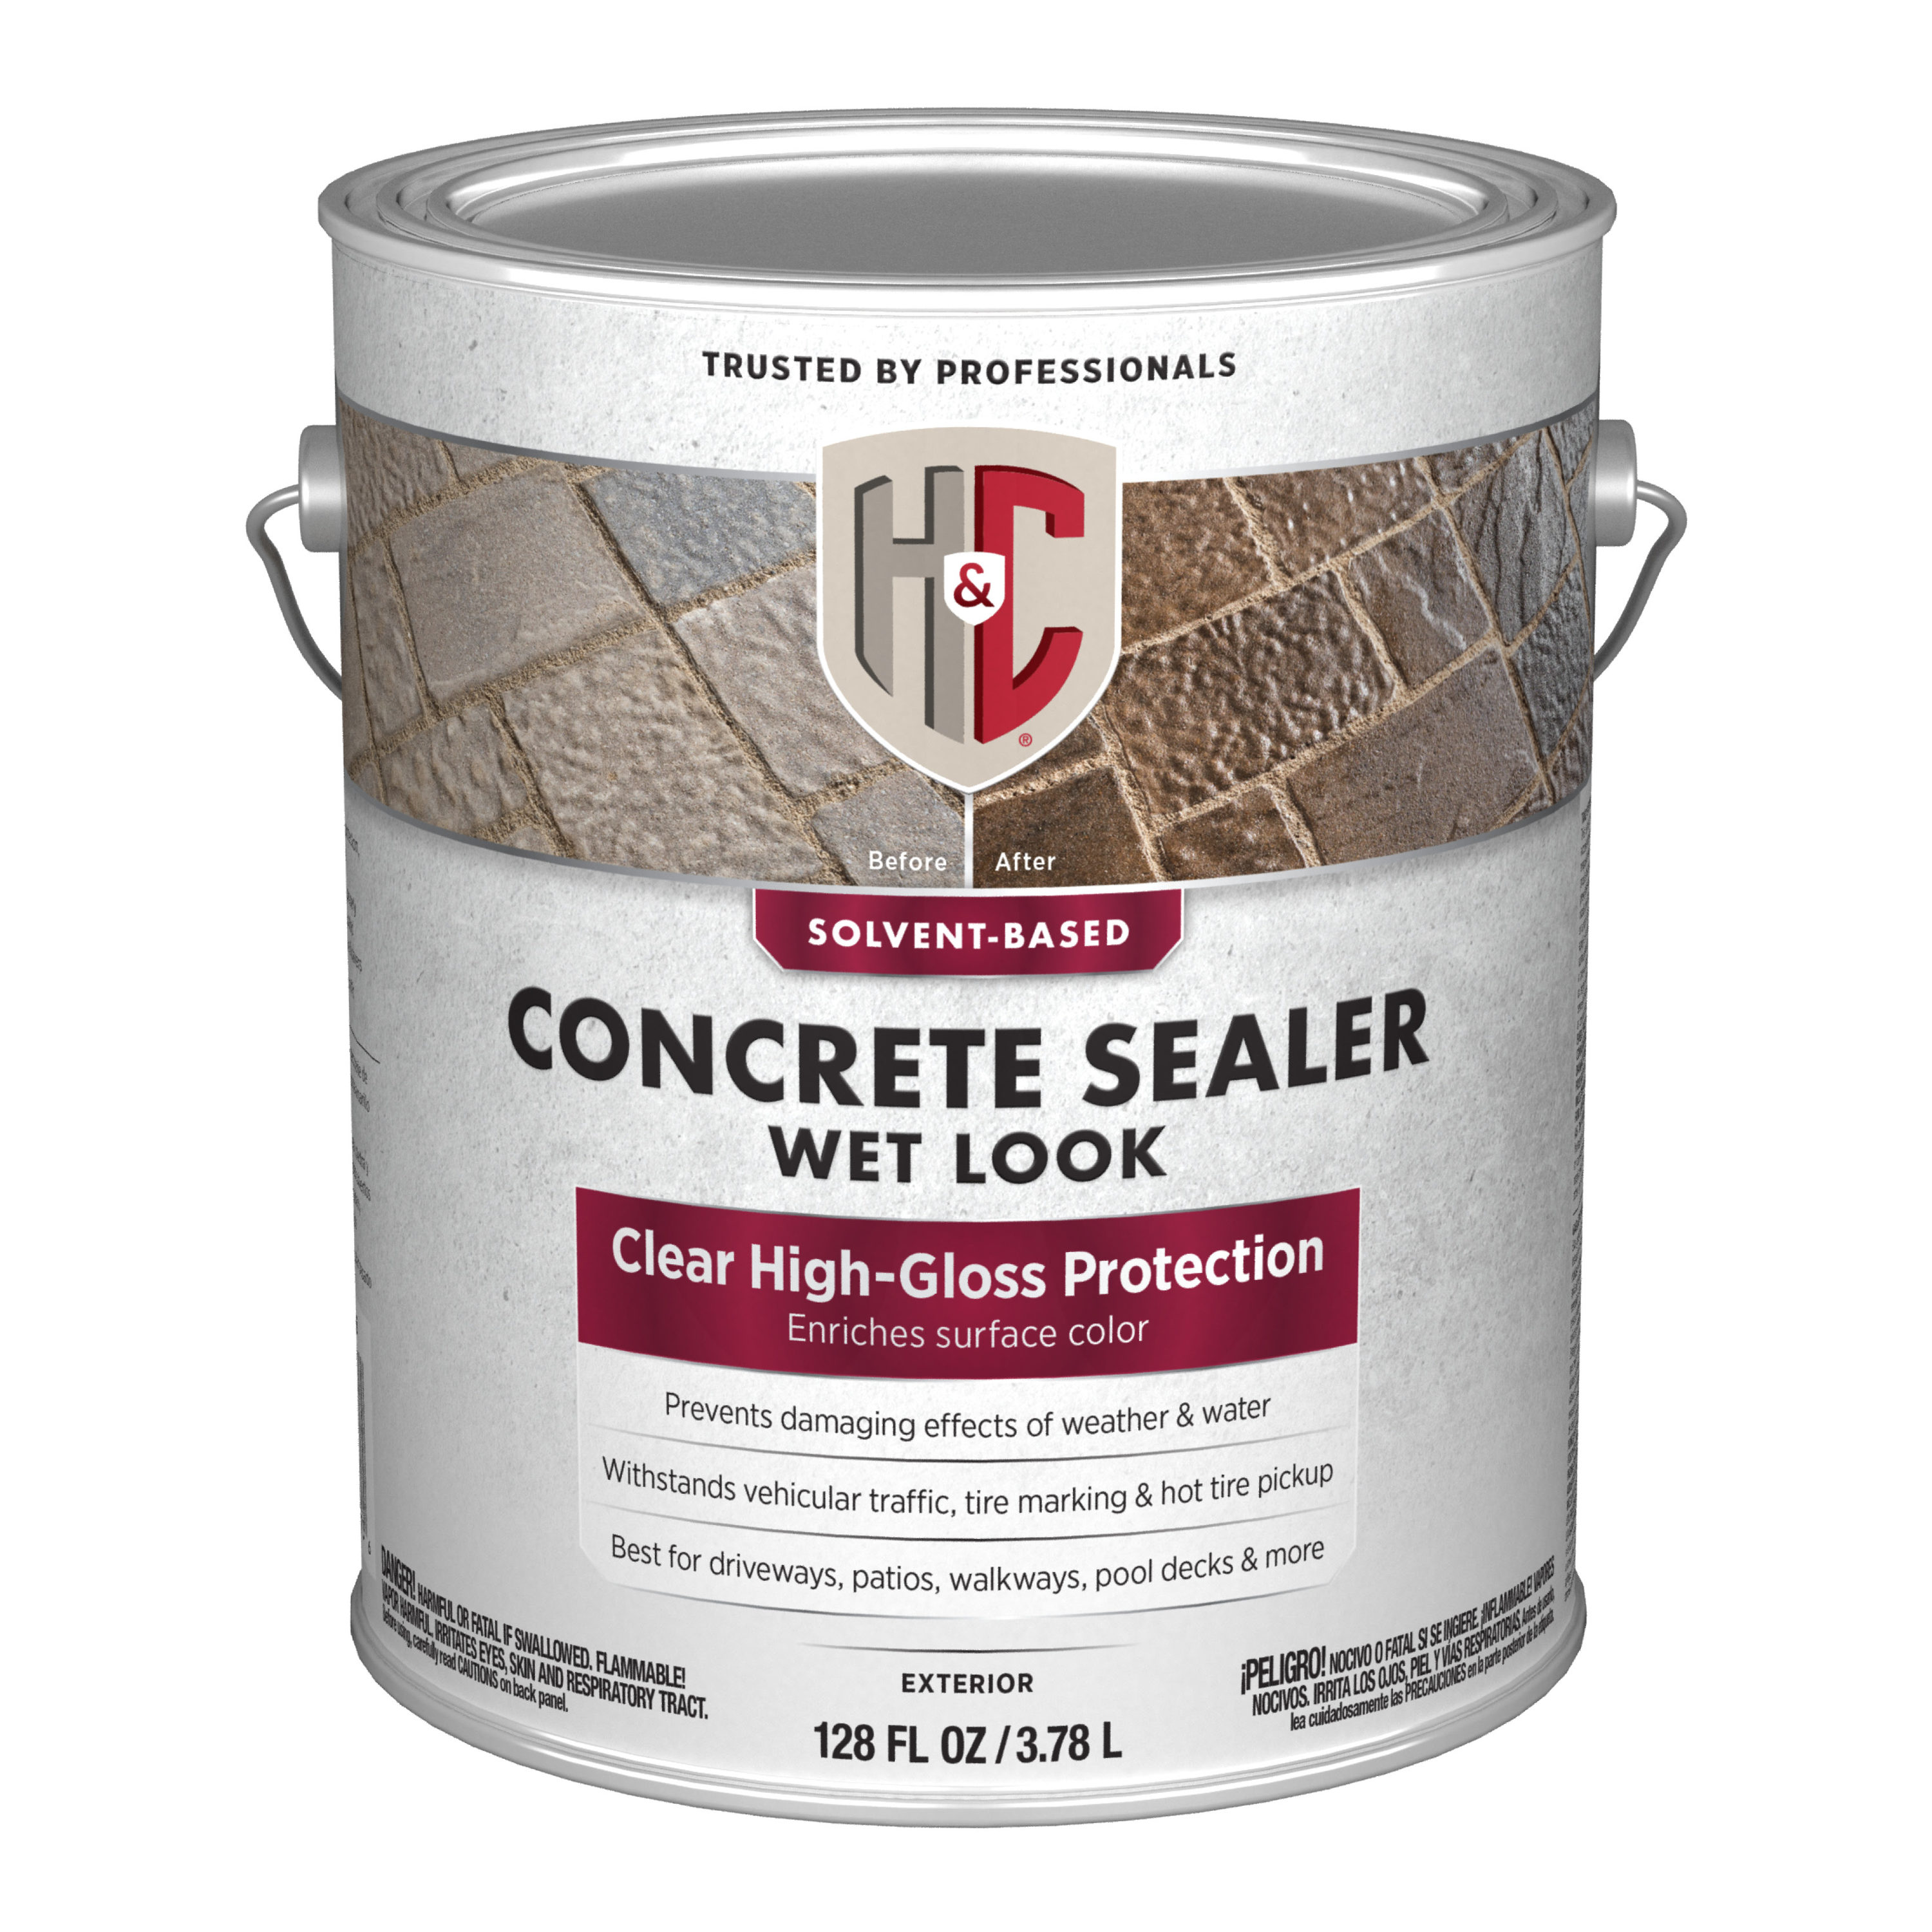 INFUSION® WATER-BASED SEMI-TRANSPARENT DECORATIVE STAIN - H&C® Concrete